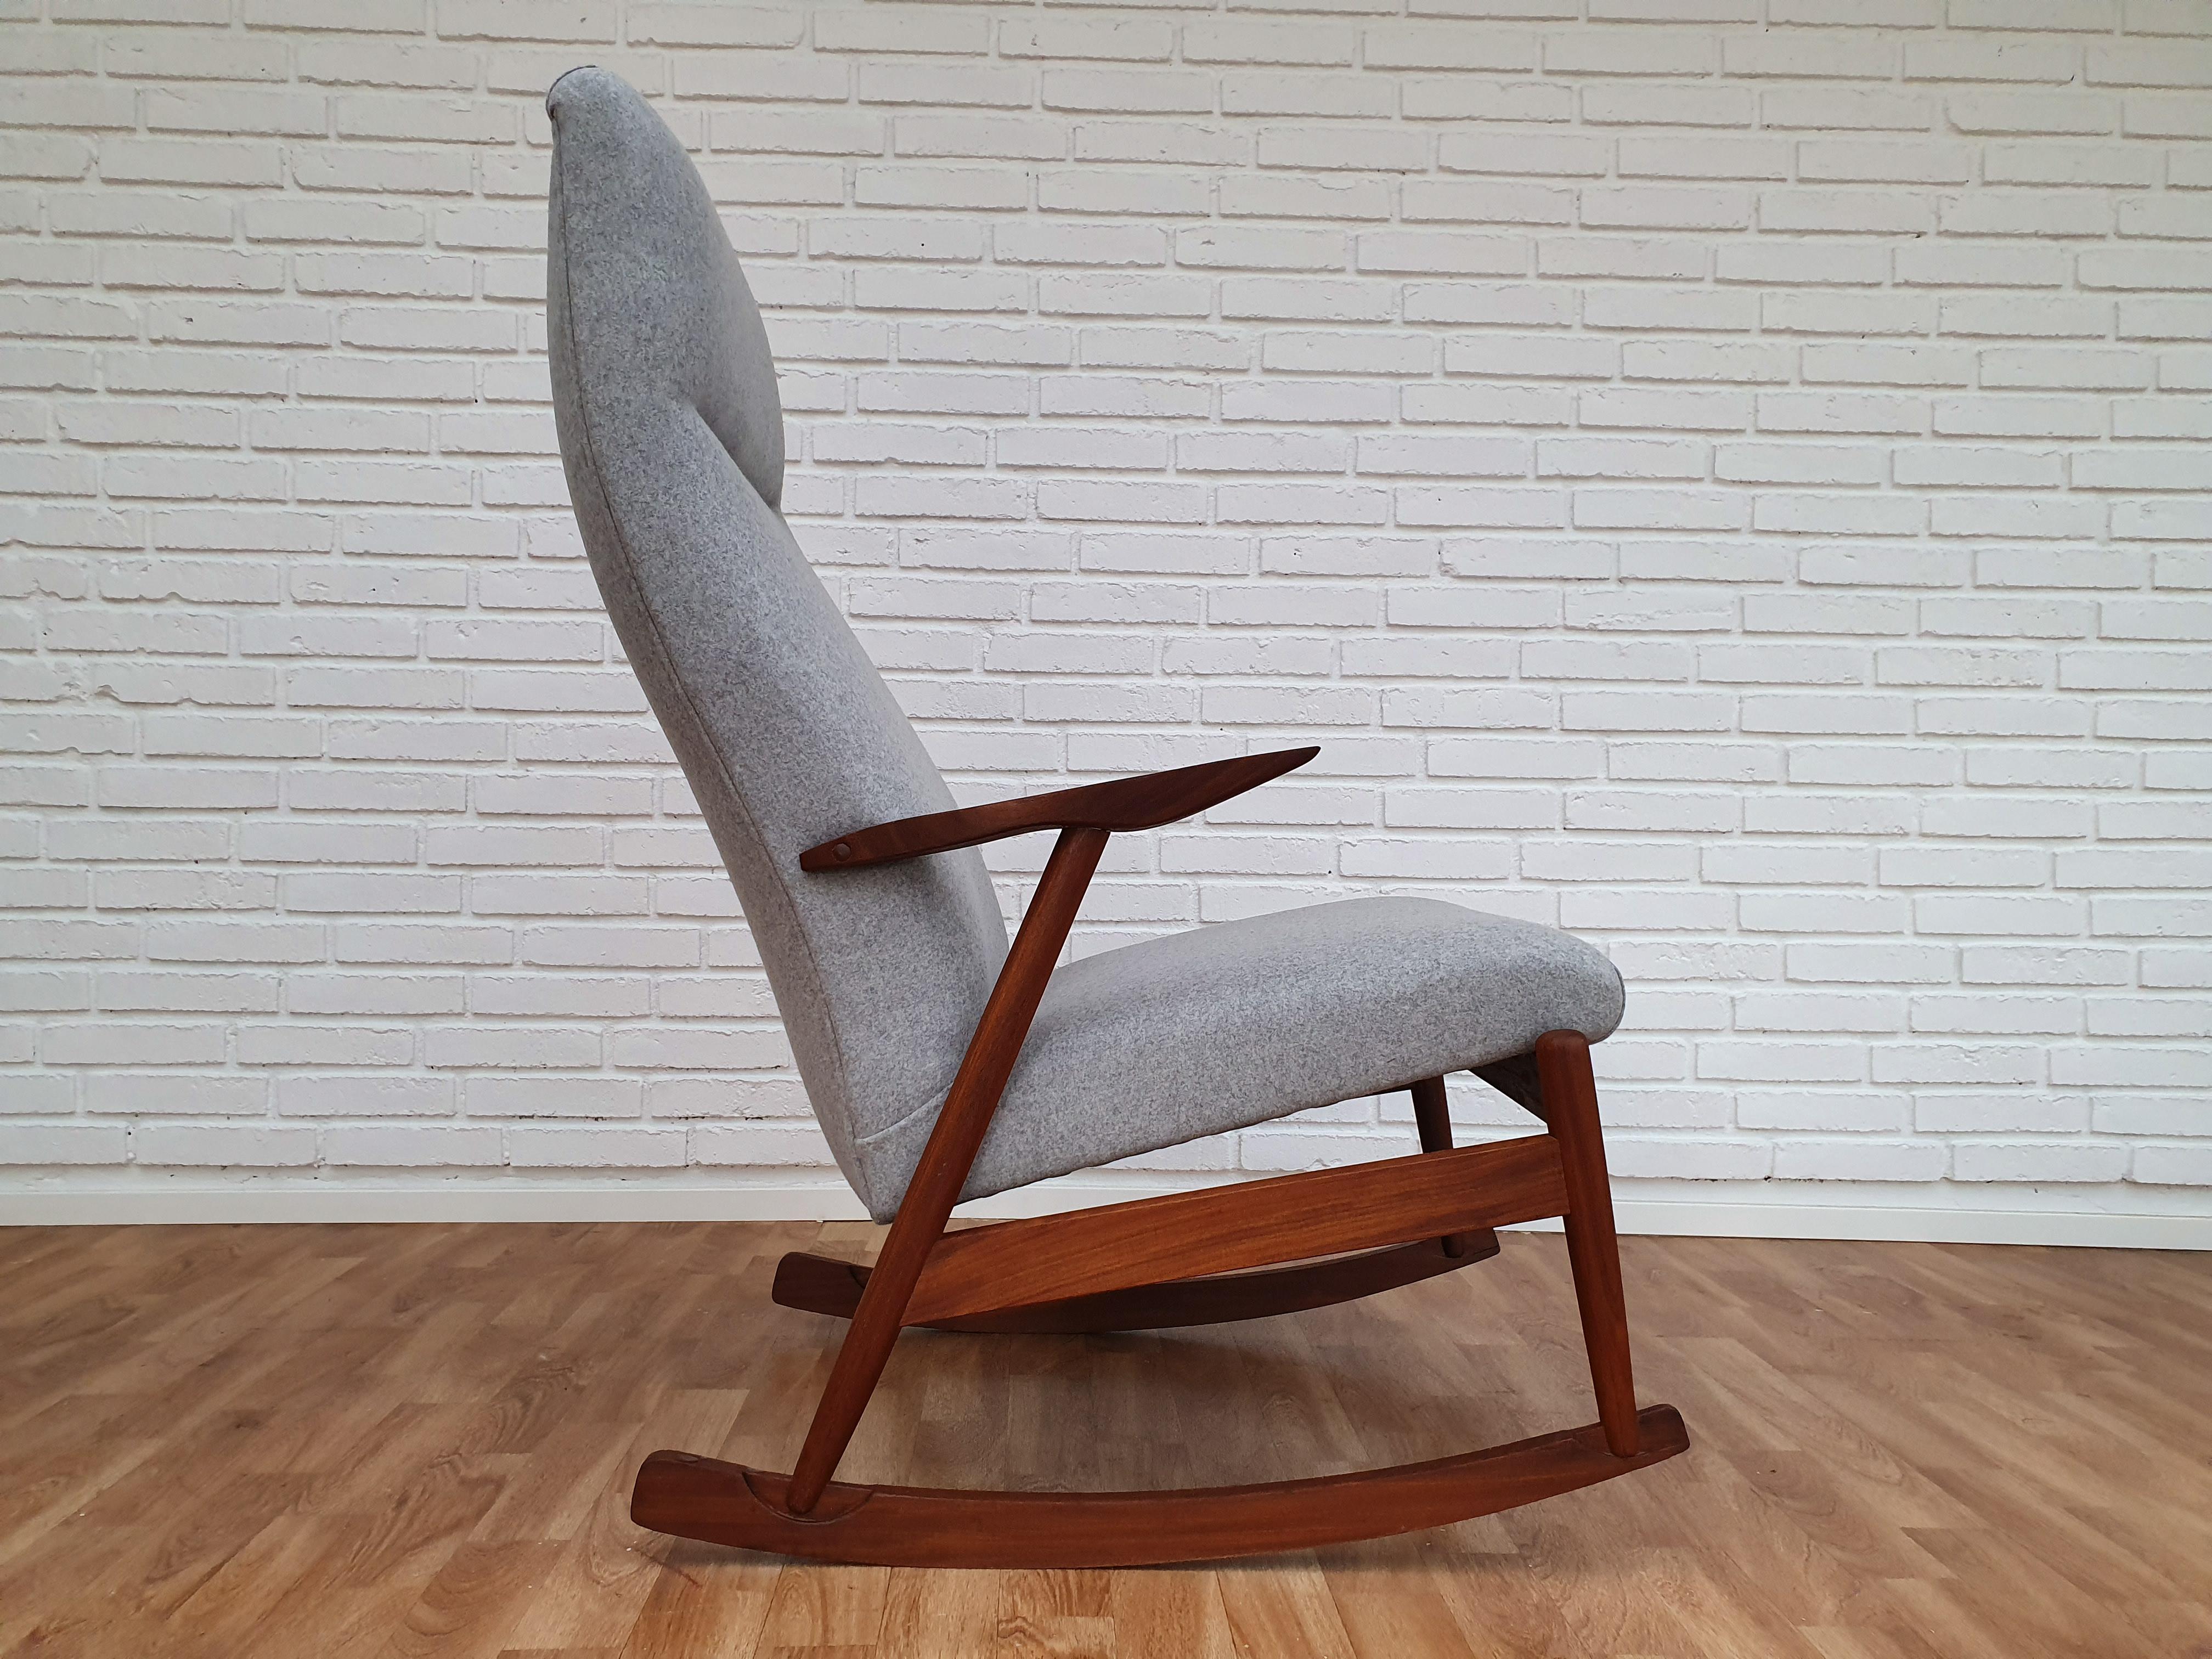 Rocking chair with teak frame. Made in circa 1960. Total renovated in quality gray wool fabric by furniture craftsman at Retro Møbler Galleri. Brand new padding with natural coconut mat. The frame is renewed, in very good condition.